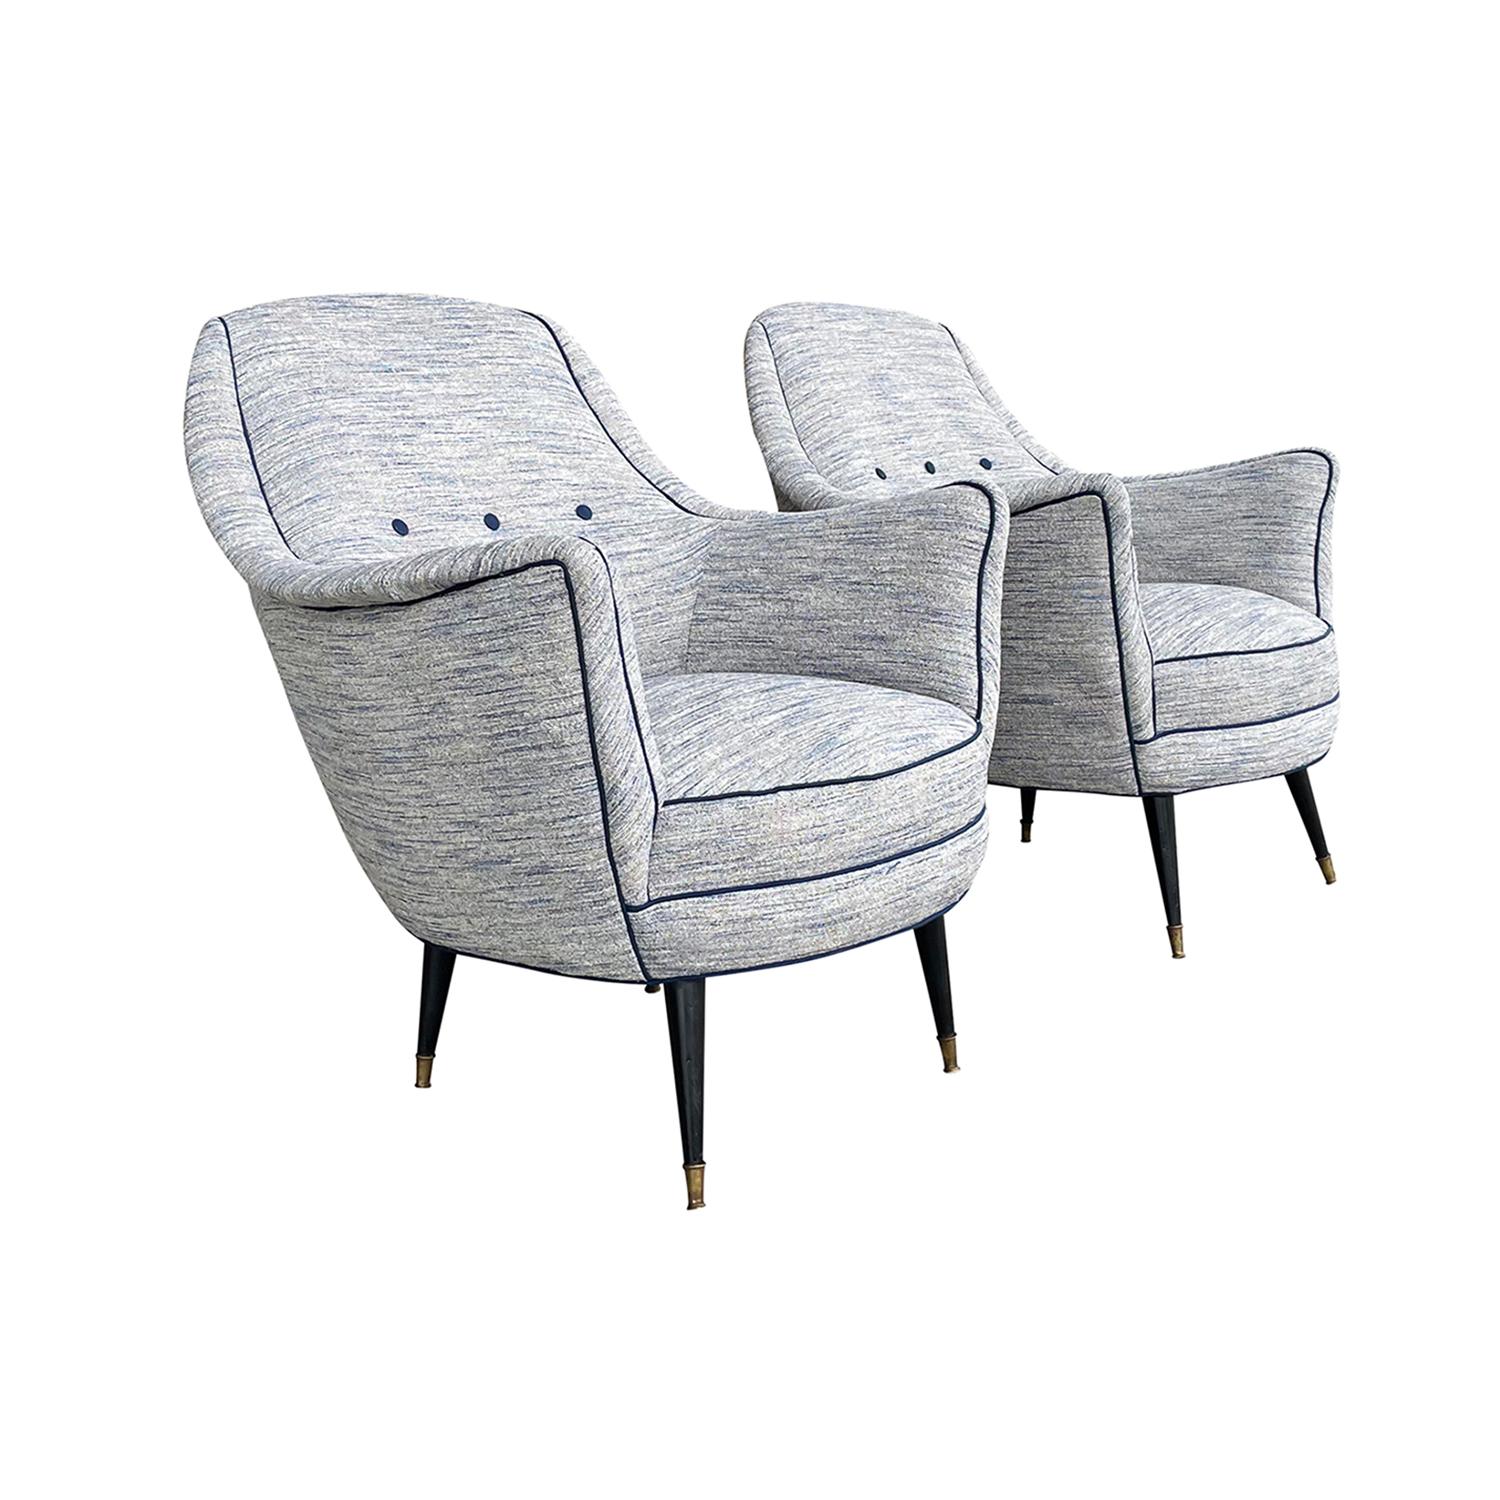 A light-blue, vintage Mid-Century Modern Italian pair of lounge chairs with a button-tufted back, designed most likely by Ico Parisi in good condition. The seat backrest of the armchairs, club chairs are slightly leaned to the back with outstretched